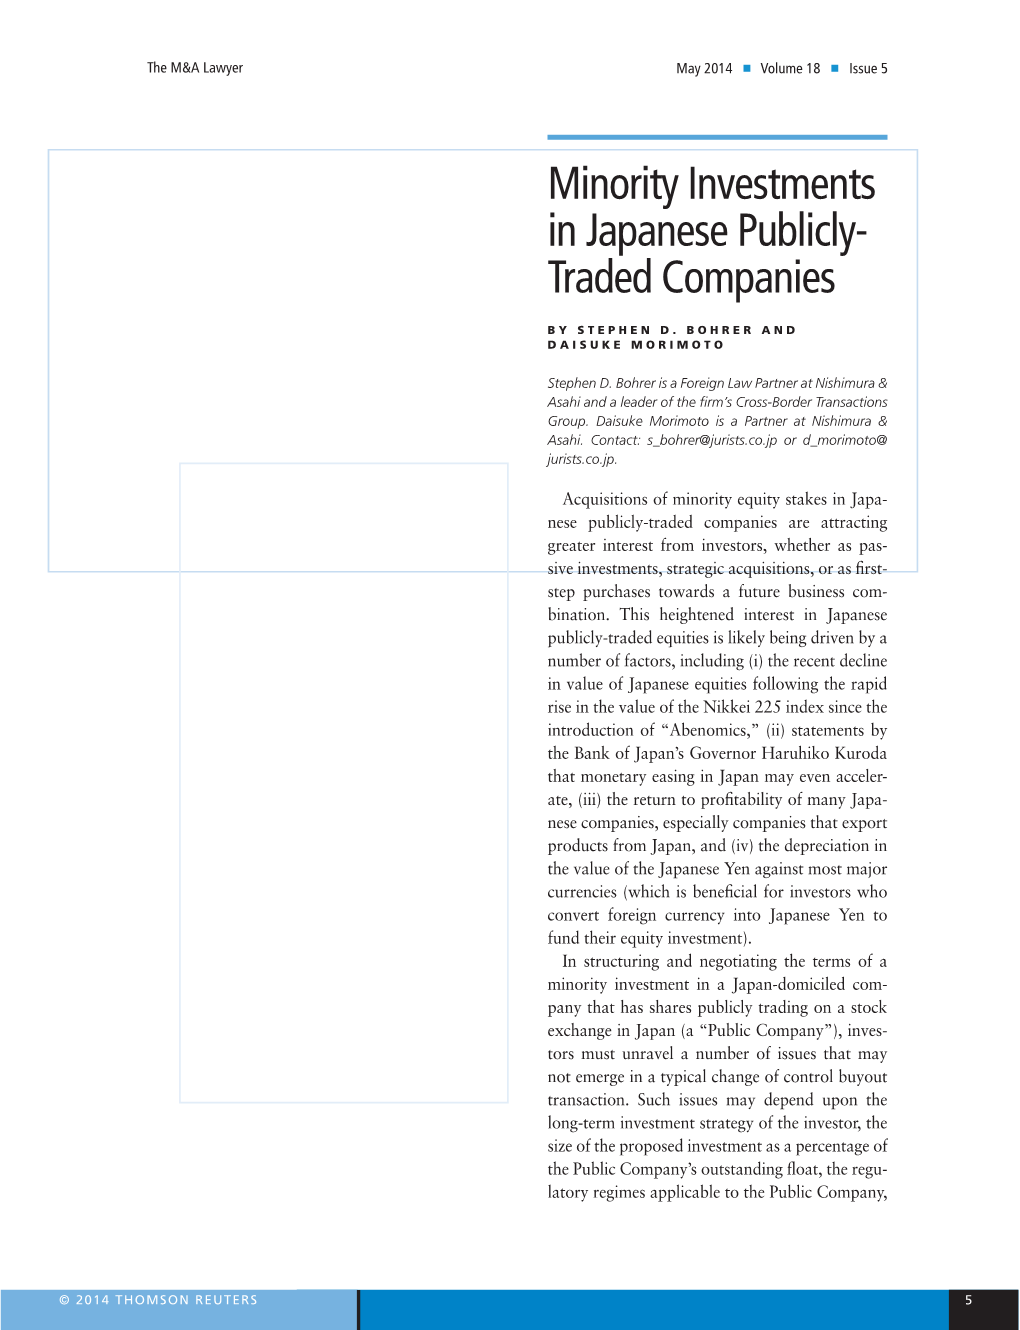 Minority Investments in Japanese Publicly- Traded Companies